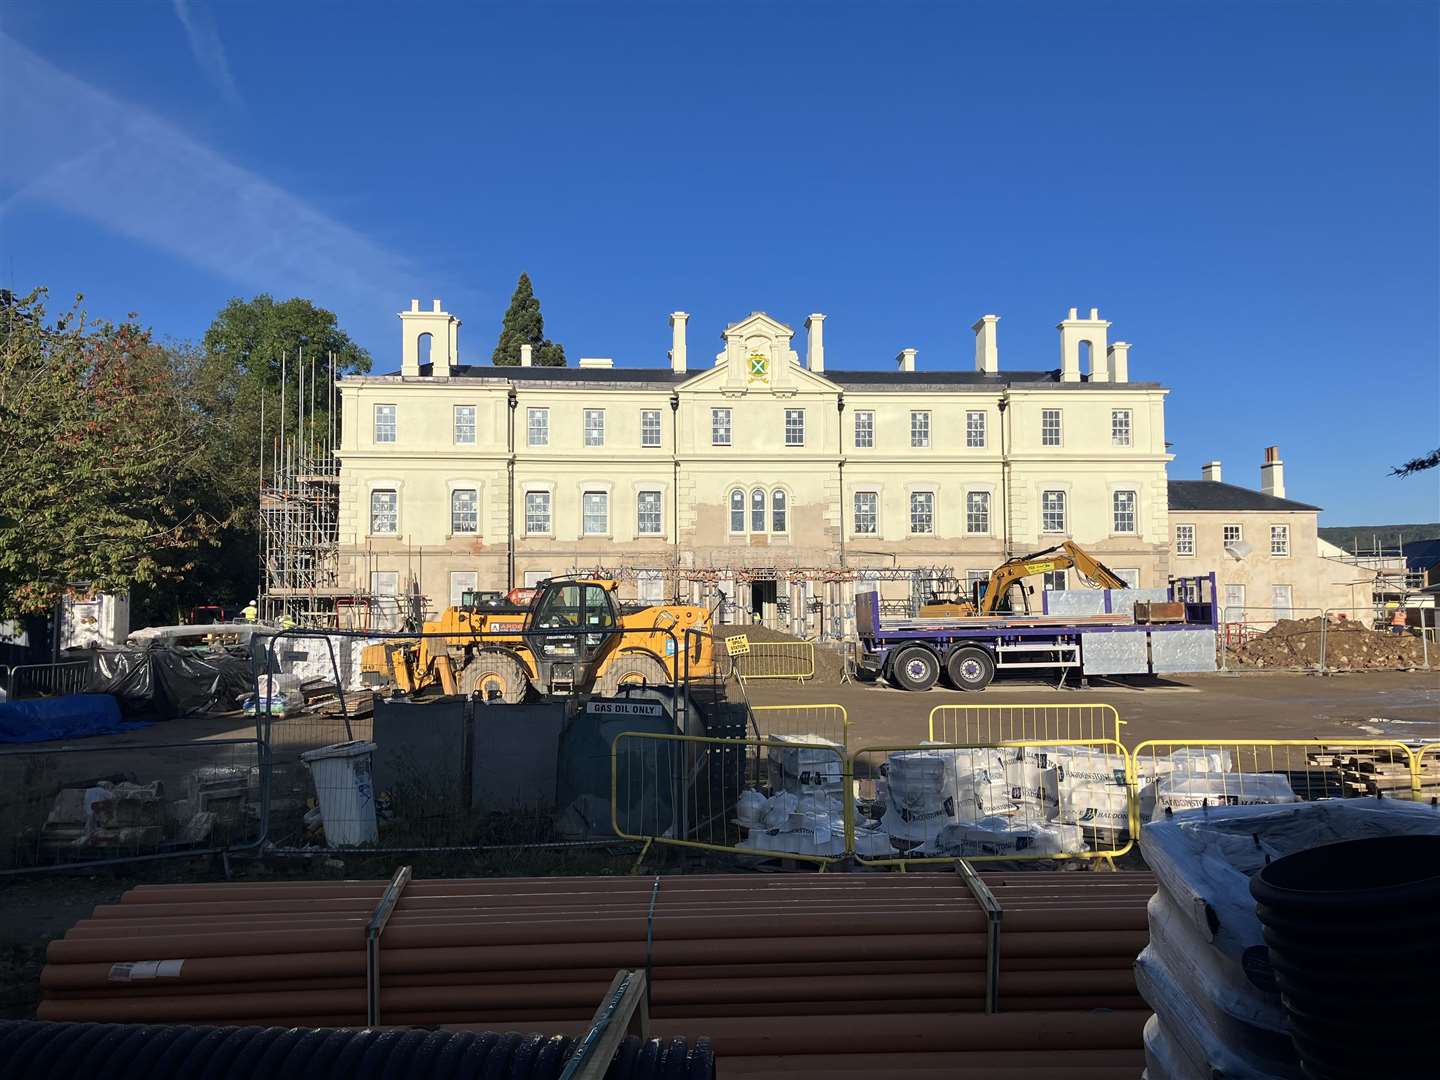 Redevelopment of the Leybourne Grange Manor House is almost complete